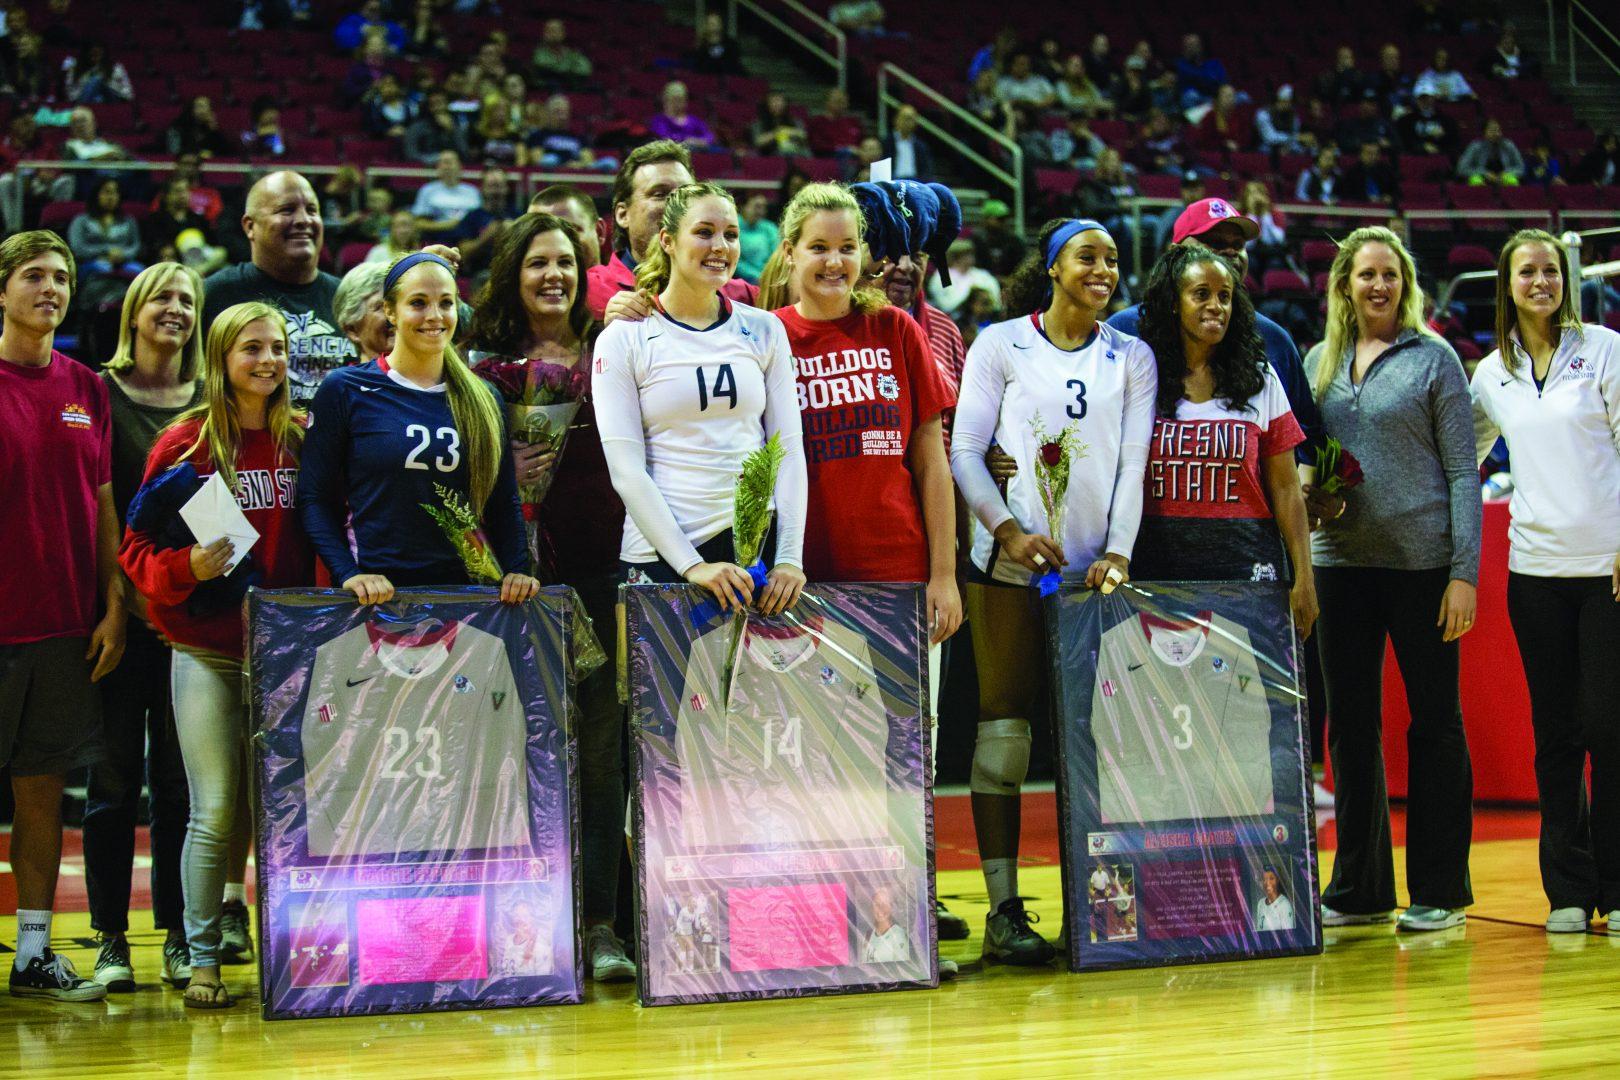 From left: Seniors Maggie Eppright (#23), Brooke Legeaux (#14) and Aleisha Coates (#3) are recognized at the Save Mart Center for Senior Salute Night before Wednesday’s game against the Utah State Aggies. (Khone Saysamongdy/The Collegian)